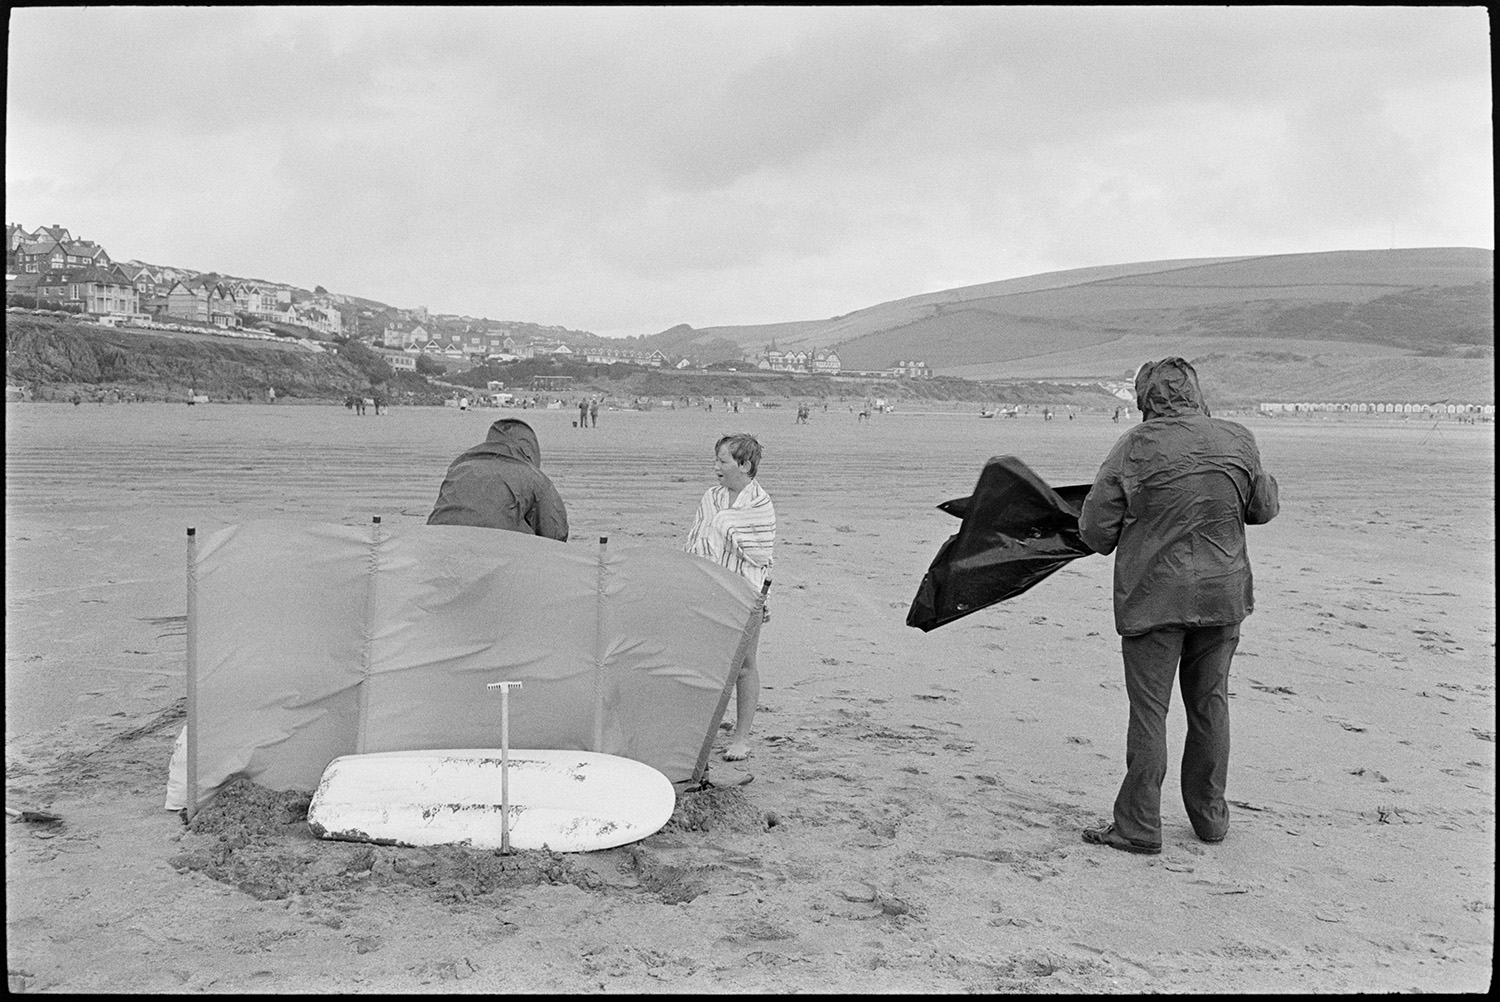 Beach scenes with donkey rides, bathing huts, people swimming.
[Holidaymakers on a wet and windy Woolacombe beach.  A surfboard is resting behind a windbreak and a child is wrapped in a towel. The town of Woolacombe is visible in the background.]